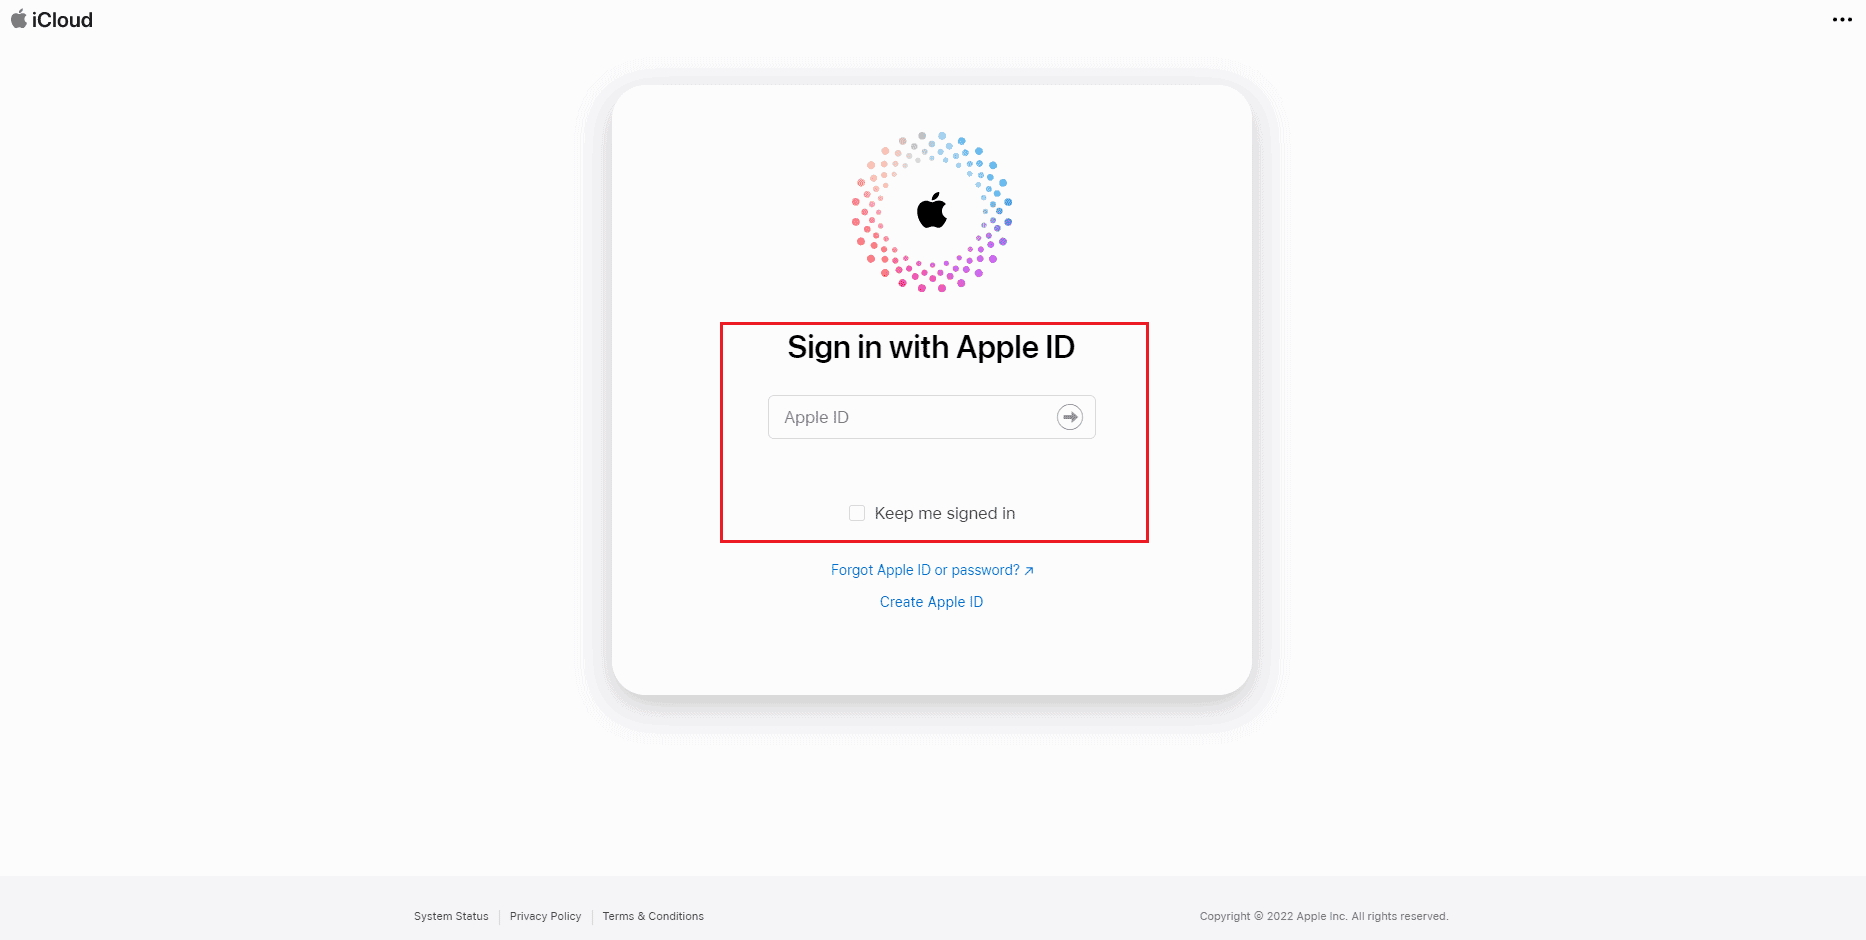 sign in with apple ID